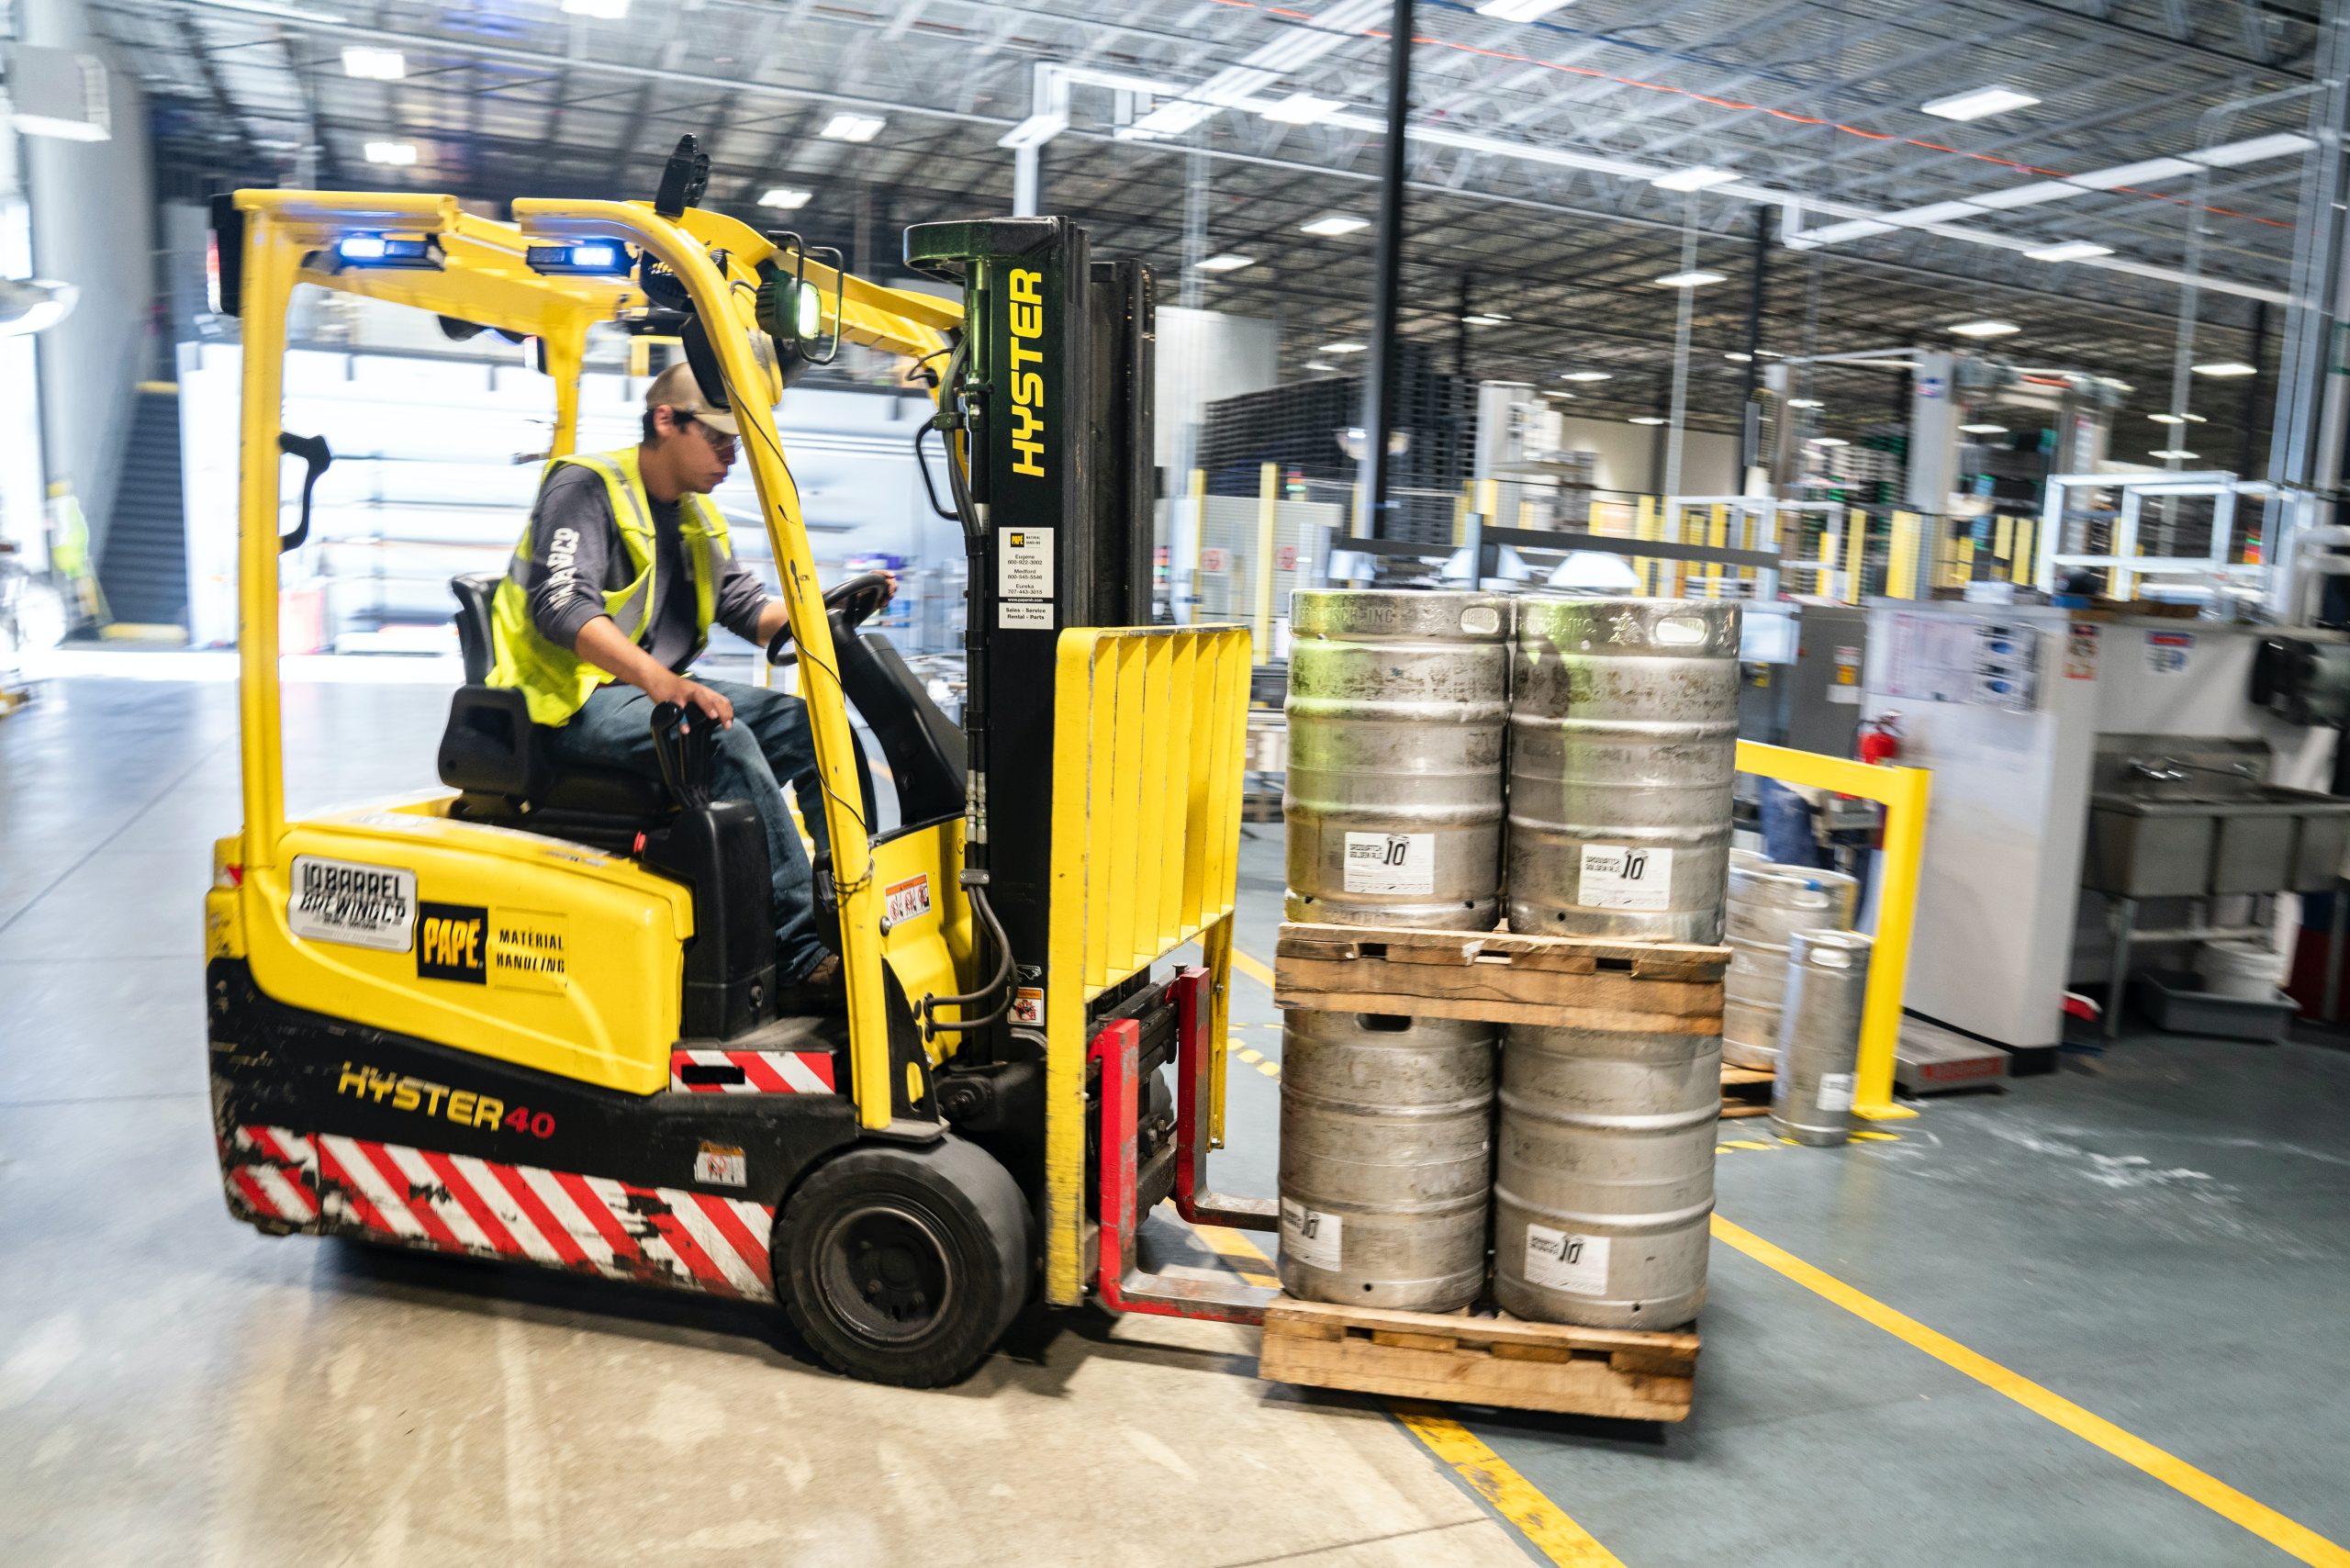 How Long Does a Forklift Course Take?